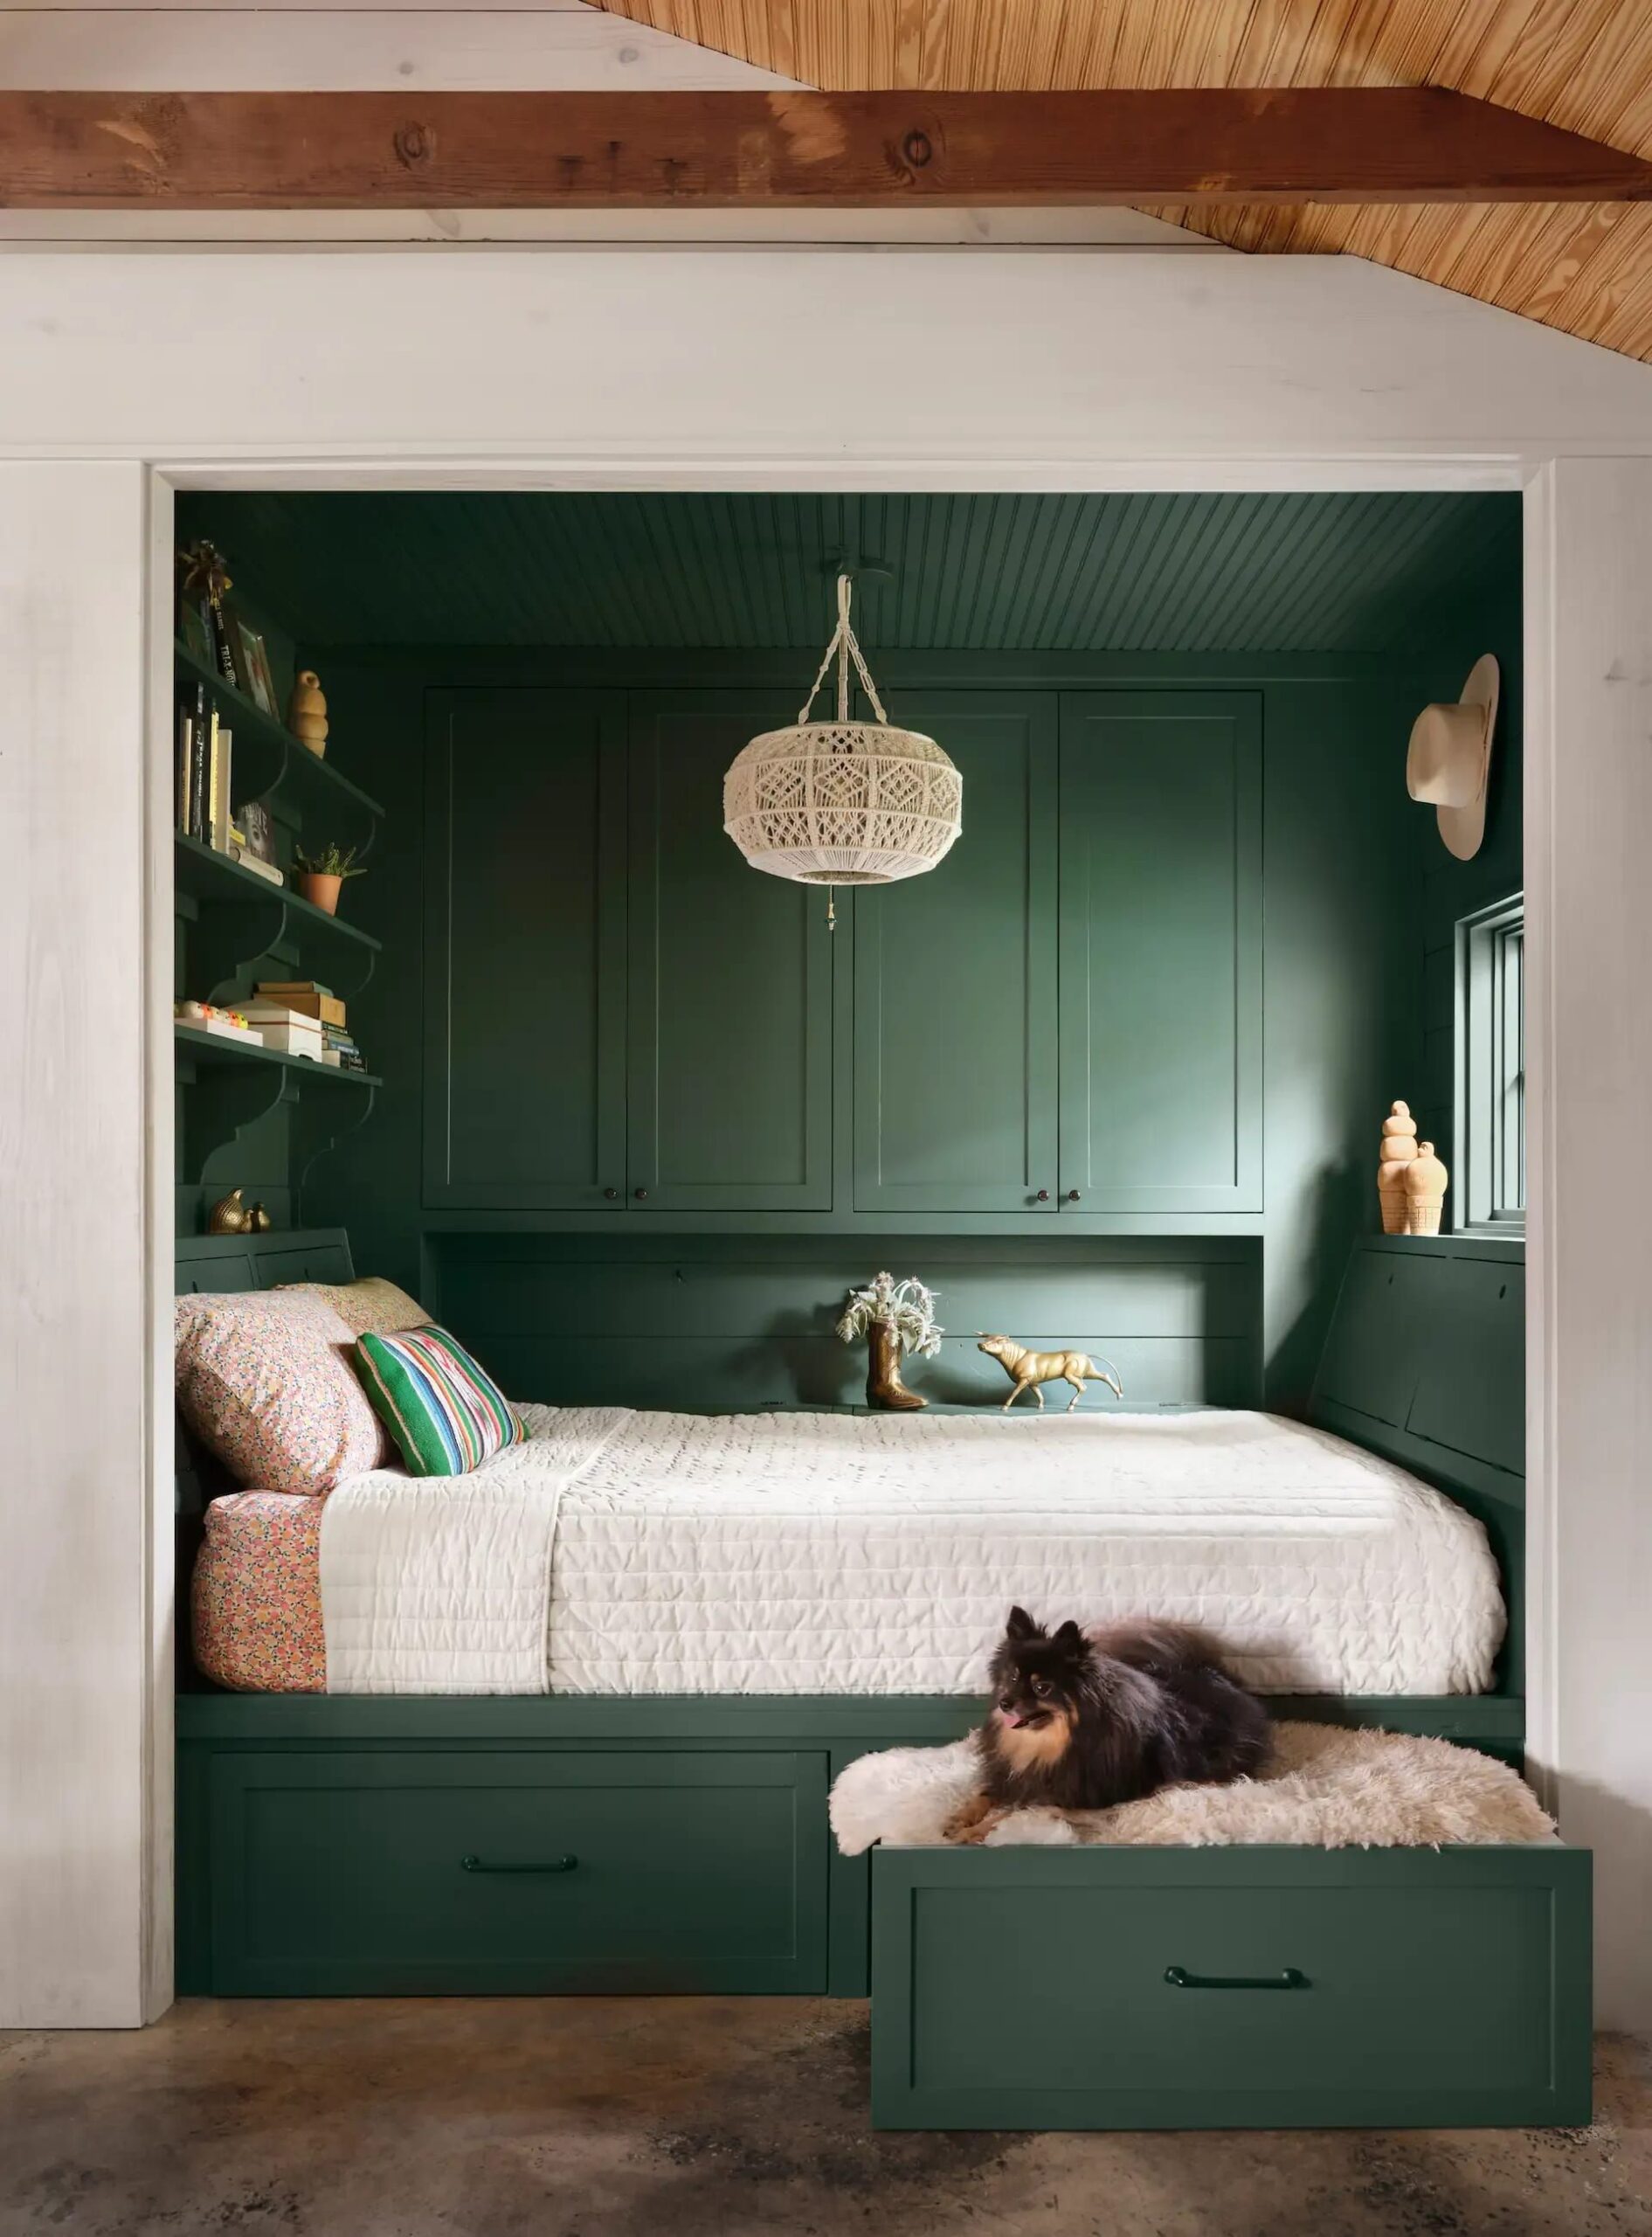 Maximizing Space: The Advantages of a
Bookcase Bed